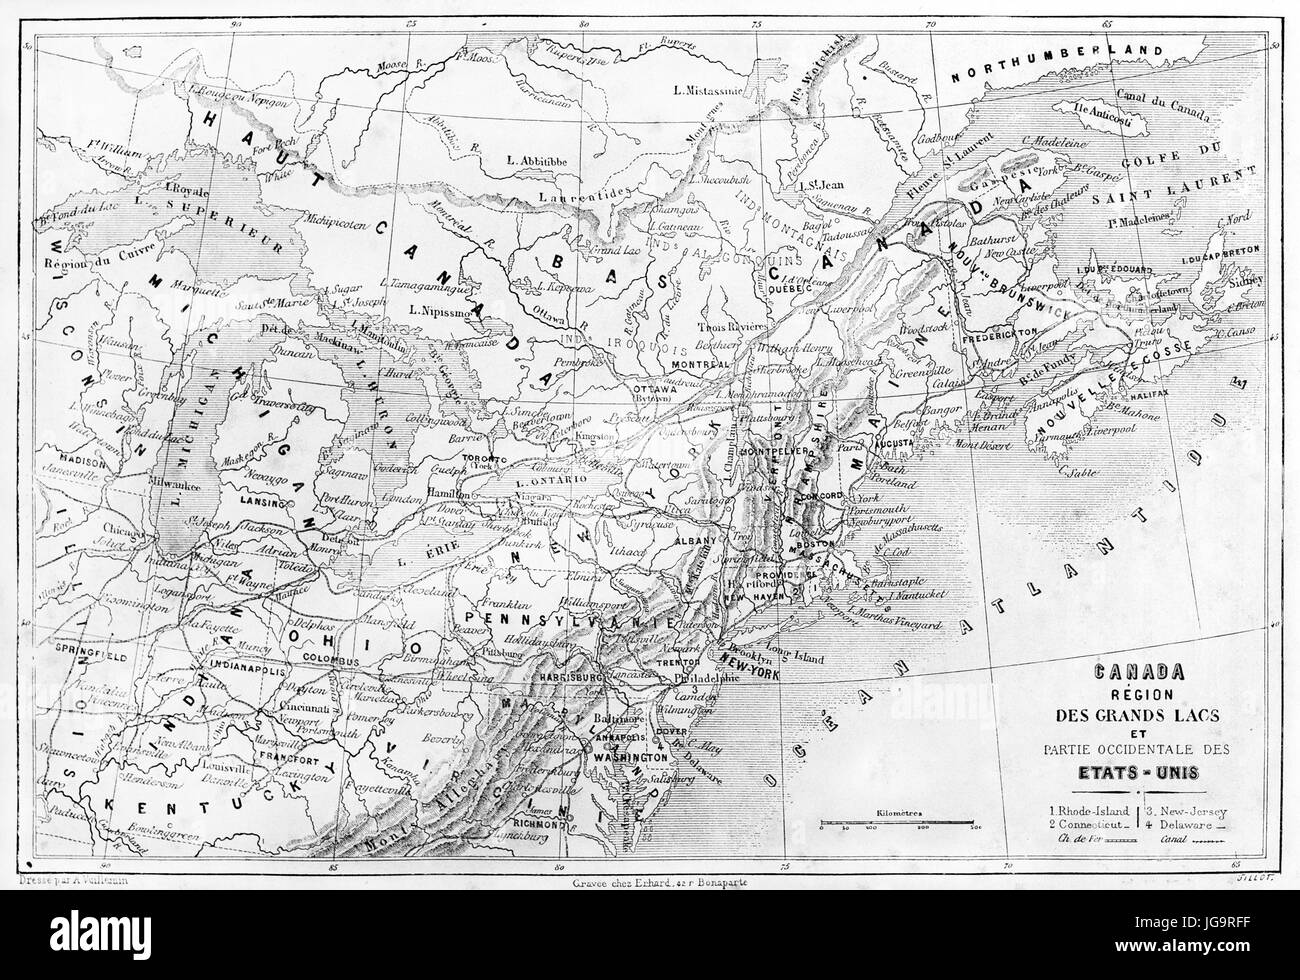 Old map of Great Lakes region, North America. Created by Erhard and Bonaparte, published on Le Tour du Monde, Paris, 1861 Stock Photo